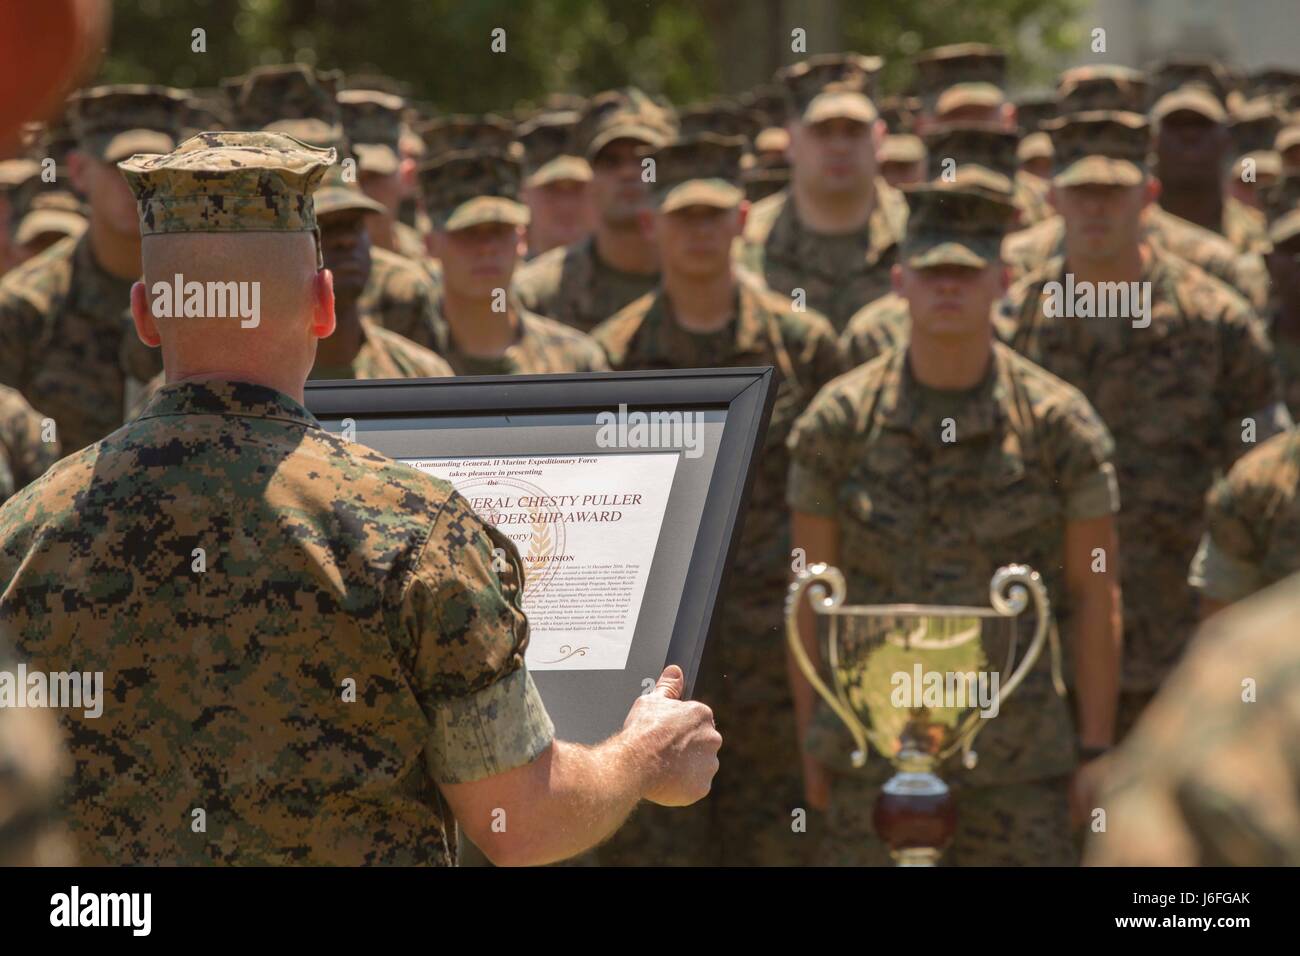 Major Gen. John K. Love, the commanding general of 2nd Marine Division, speaks to Marines during a Chesty Puller award ceremony at Camp Lejeune, N.C., May 15, 2017. The Marines earned the award due to their impressive conduct in combat, garrison and in the field of innovation throughout the calendar year of 2016. The Marines are with 2nd Battalion, 6th Marine Regiment, 2nd Marine Division. (U.S. Marine Corps photo by Pfc. Abrey D. Liggins) Stock Photo